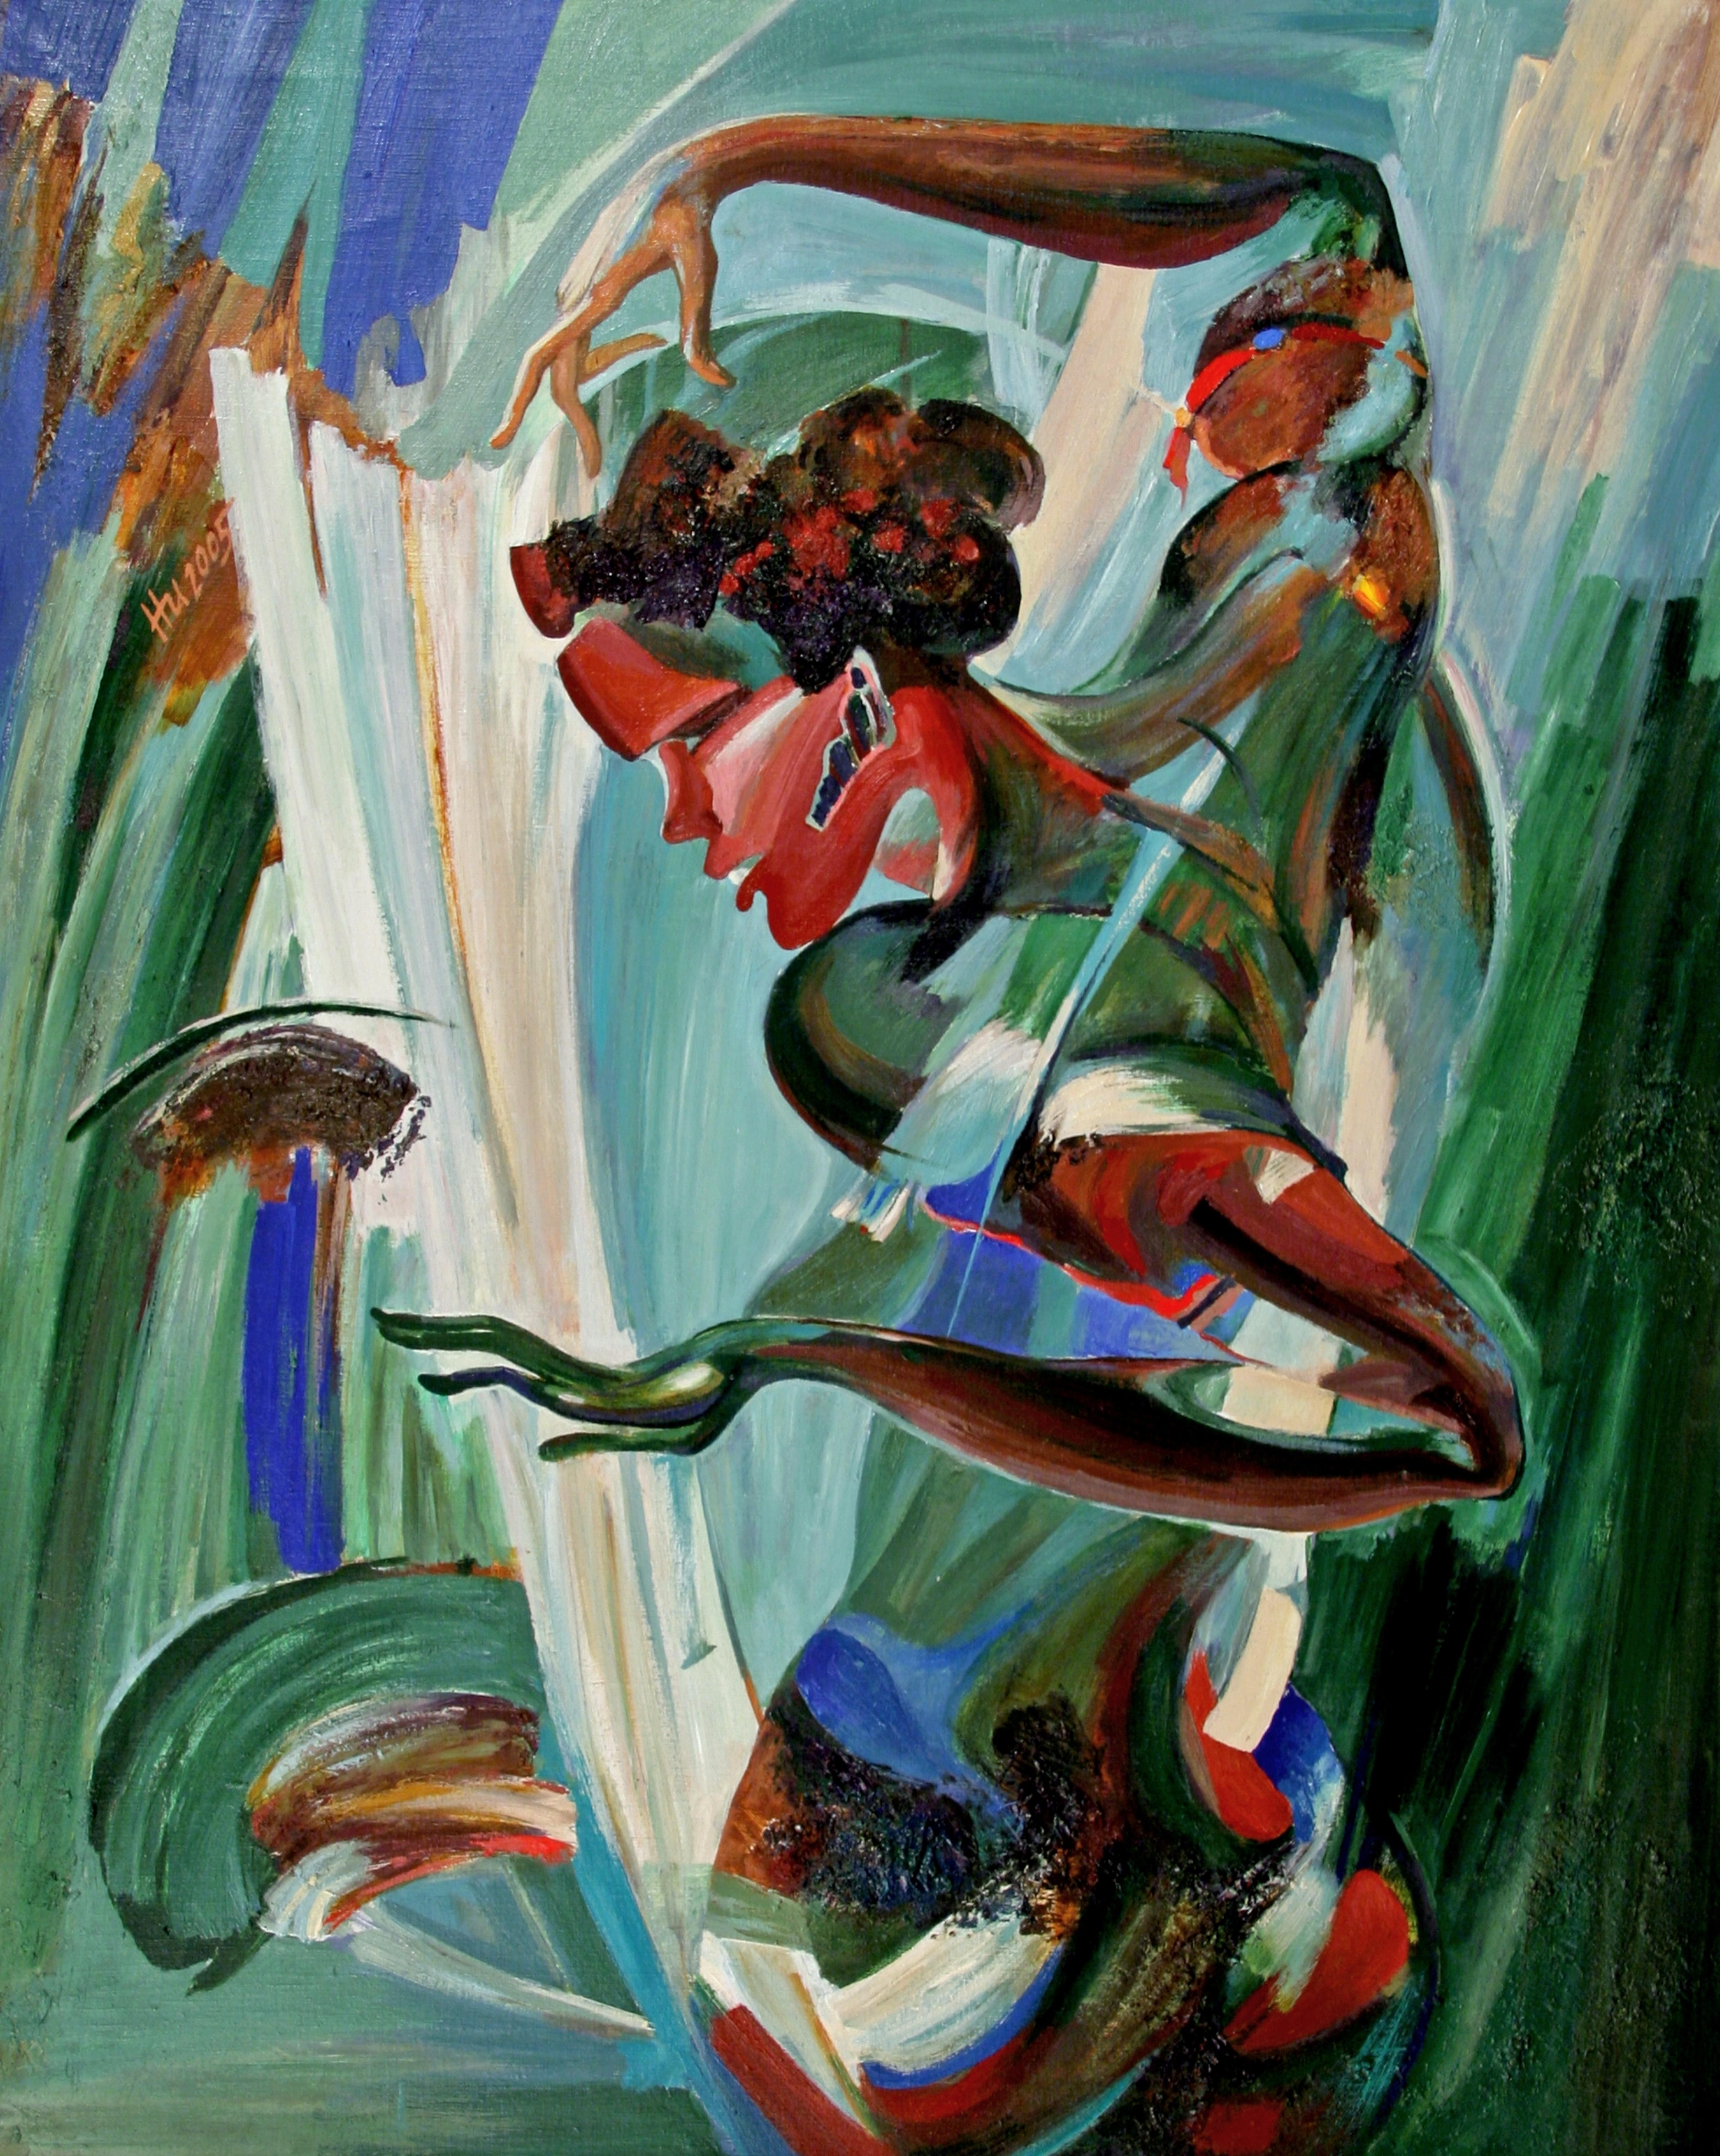 "Dance with Drums", 97x78cm, oil on canvas - Art by Ivan Nesvetailo